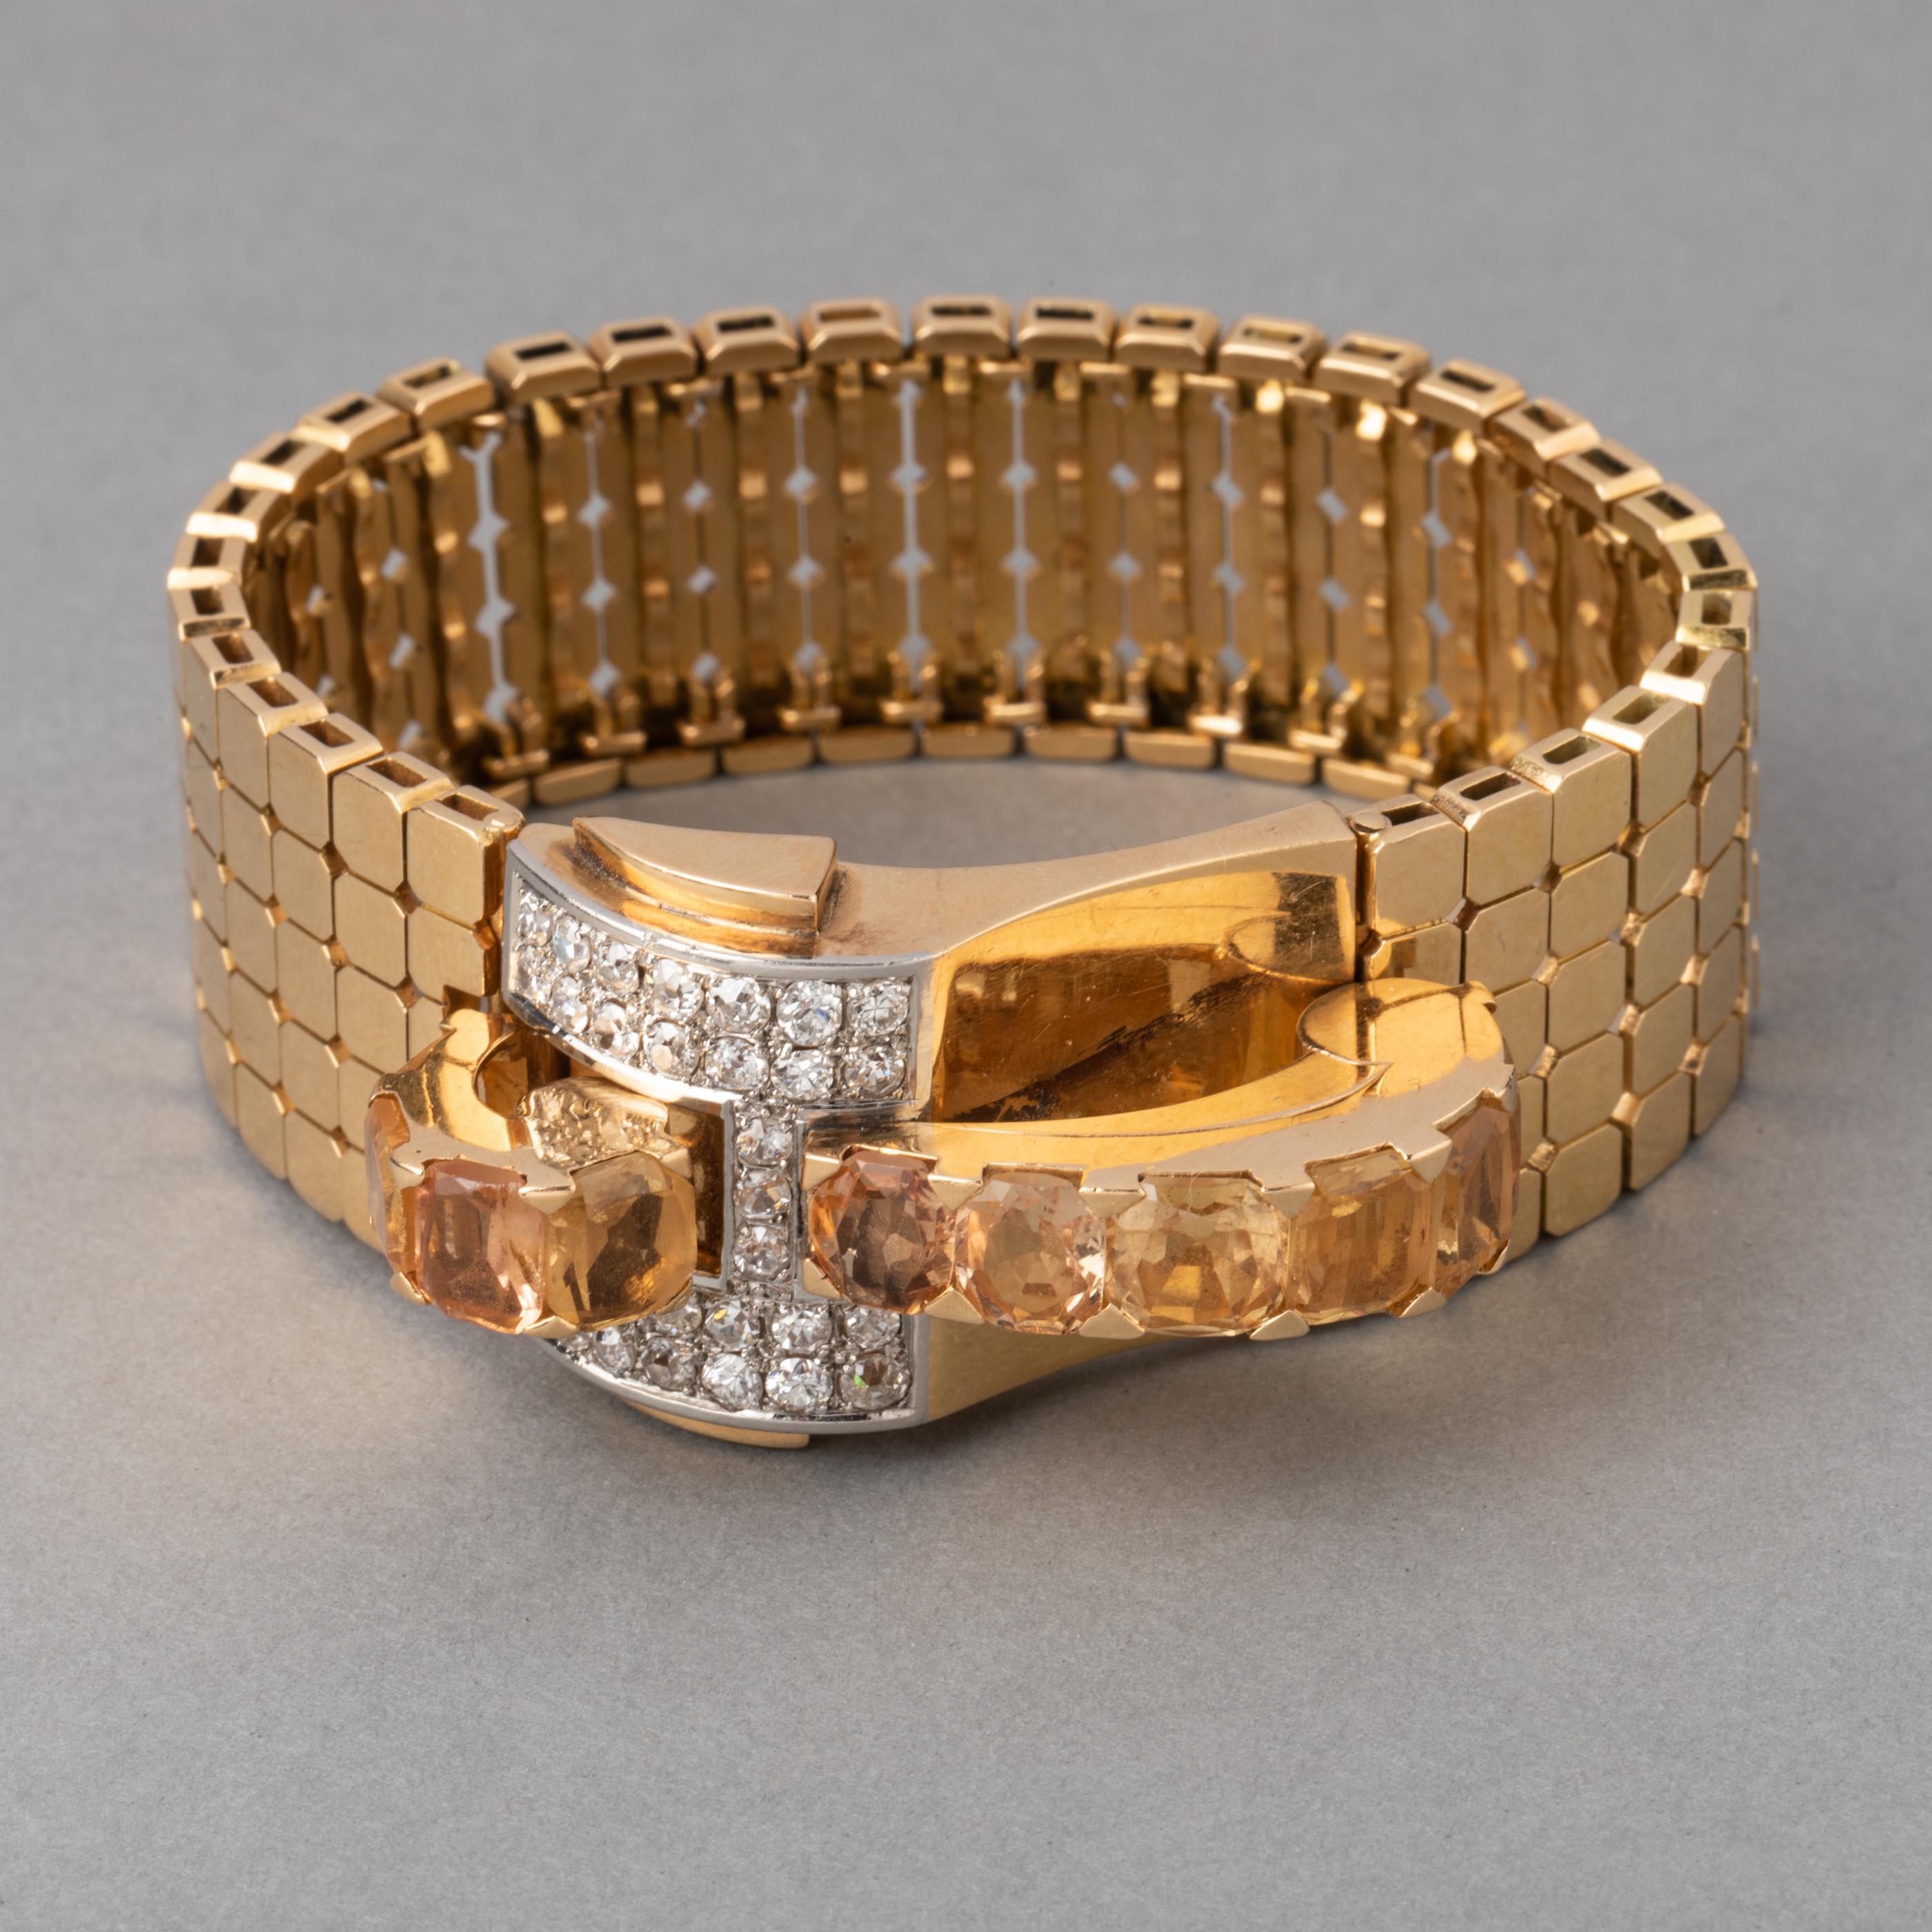 1935's Gold Diamonds and Citrines Bracelet

Very beautiful bracelet, made in France circa 1935/40. 
Gold 18k, 2.50 carats of diamonds. Set with citrines, the design is elegant.
Total weight is 79.10 grams.
The size is 17.5 cm, the bracelet is 2,1 cm